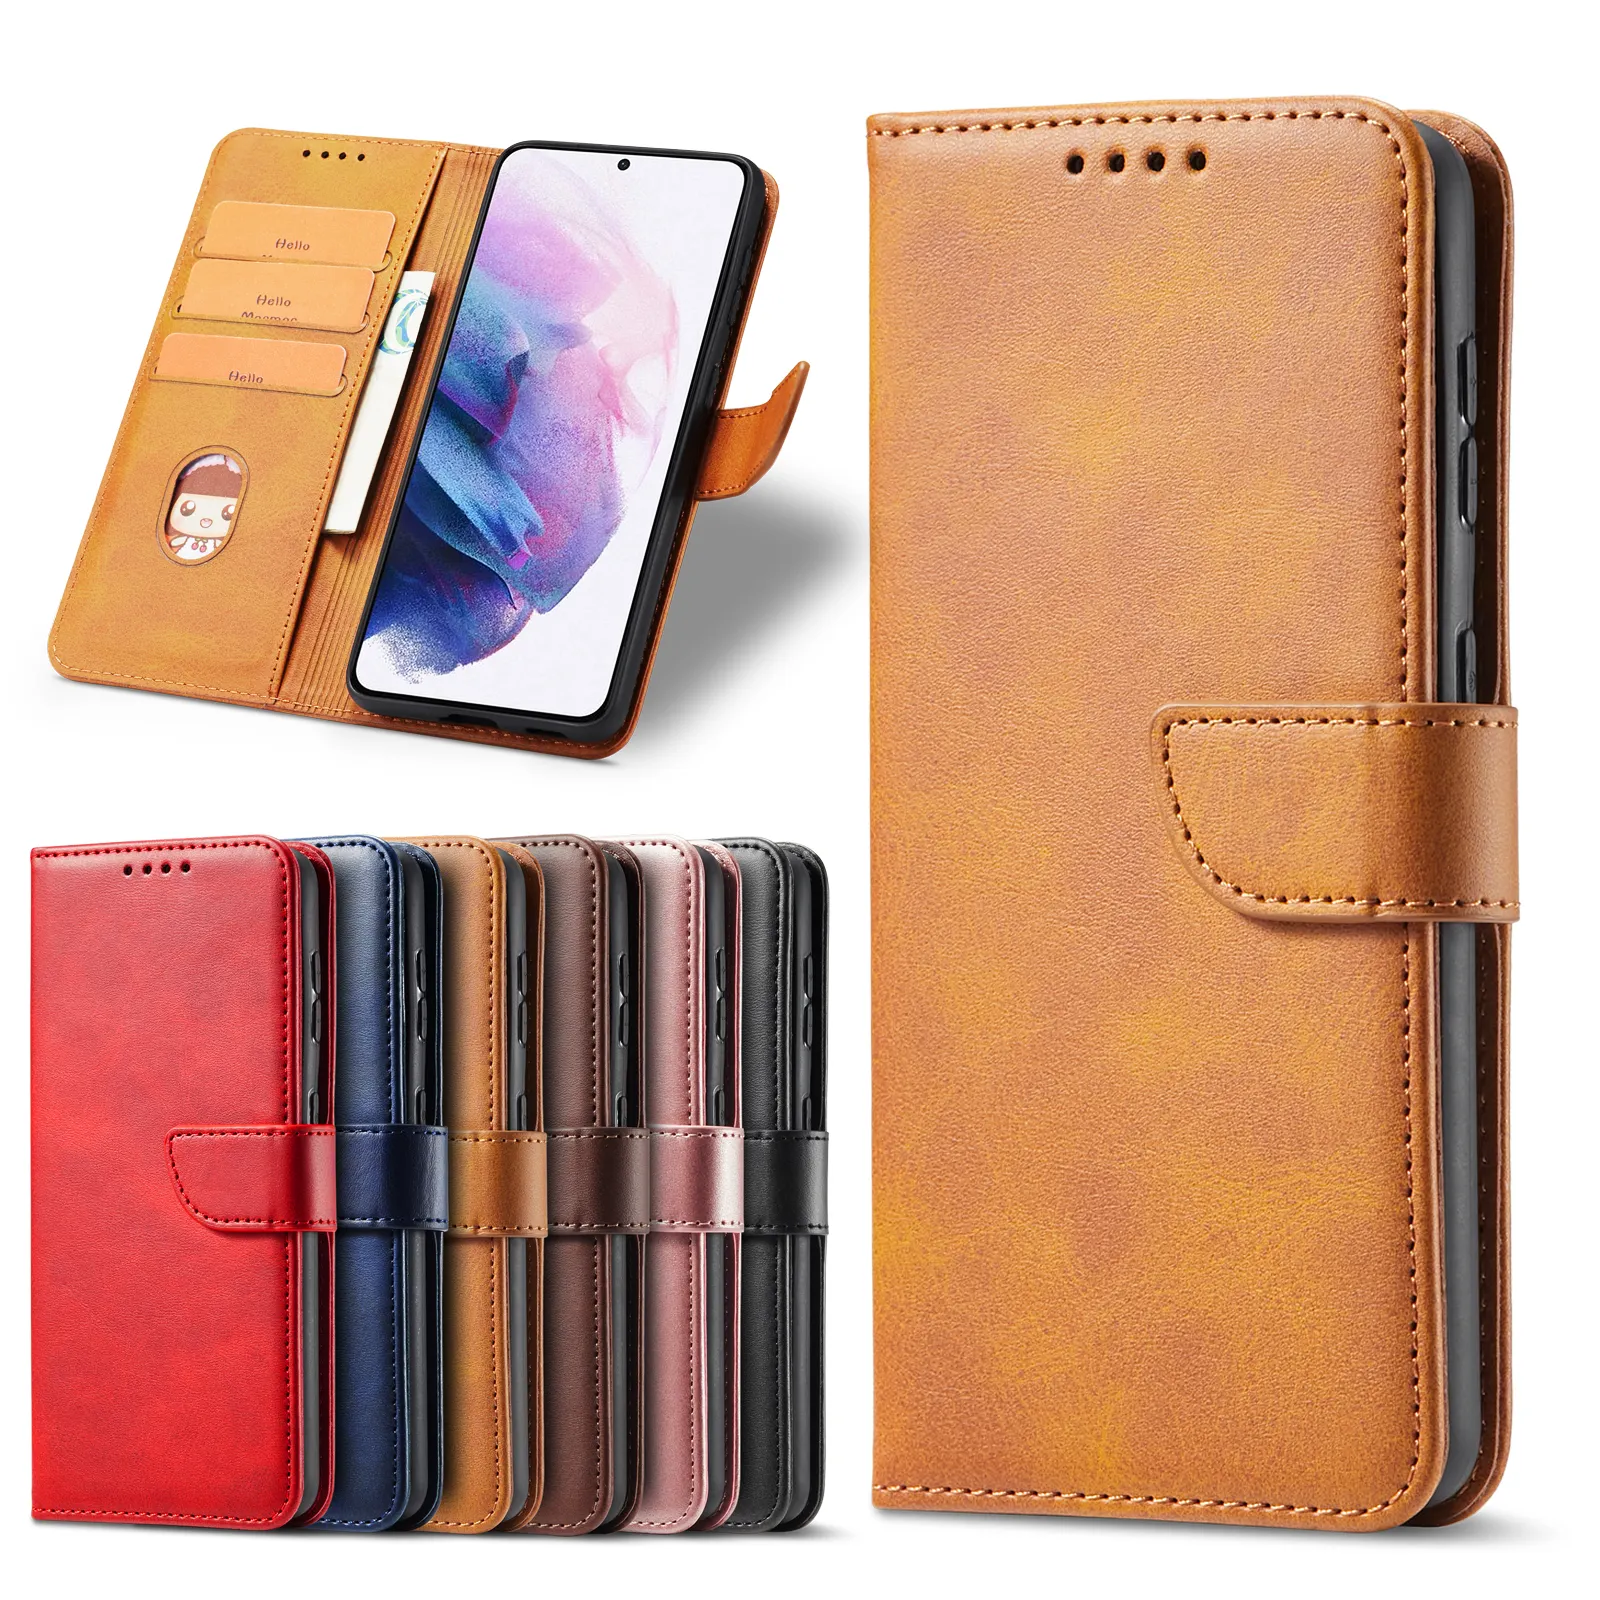 Tschick Leather Case For Samsung Galaxy S21 Plus Ultra S21Plus S21Ultra Cases Wallet Flip Stand Cover Mobile Phone Bag Shell